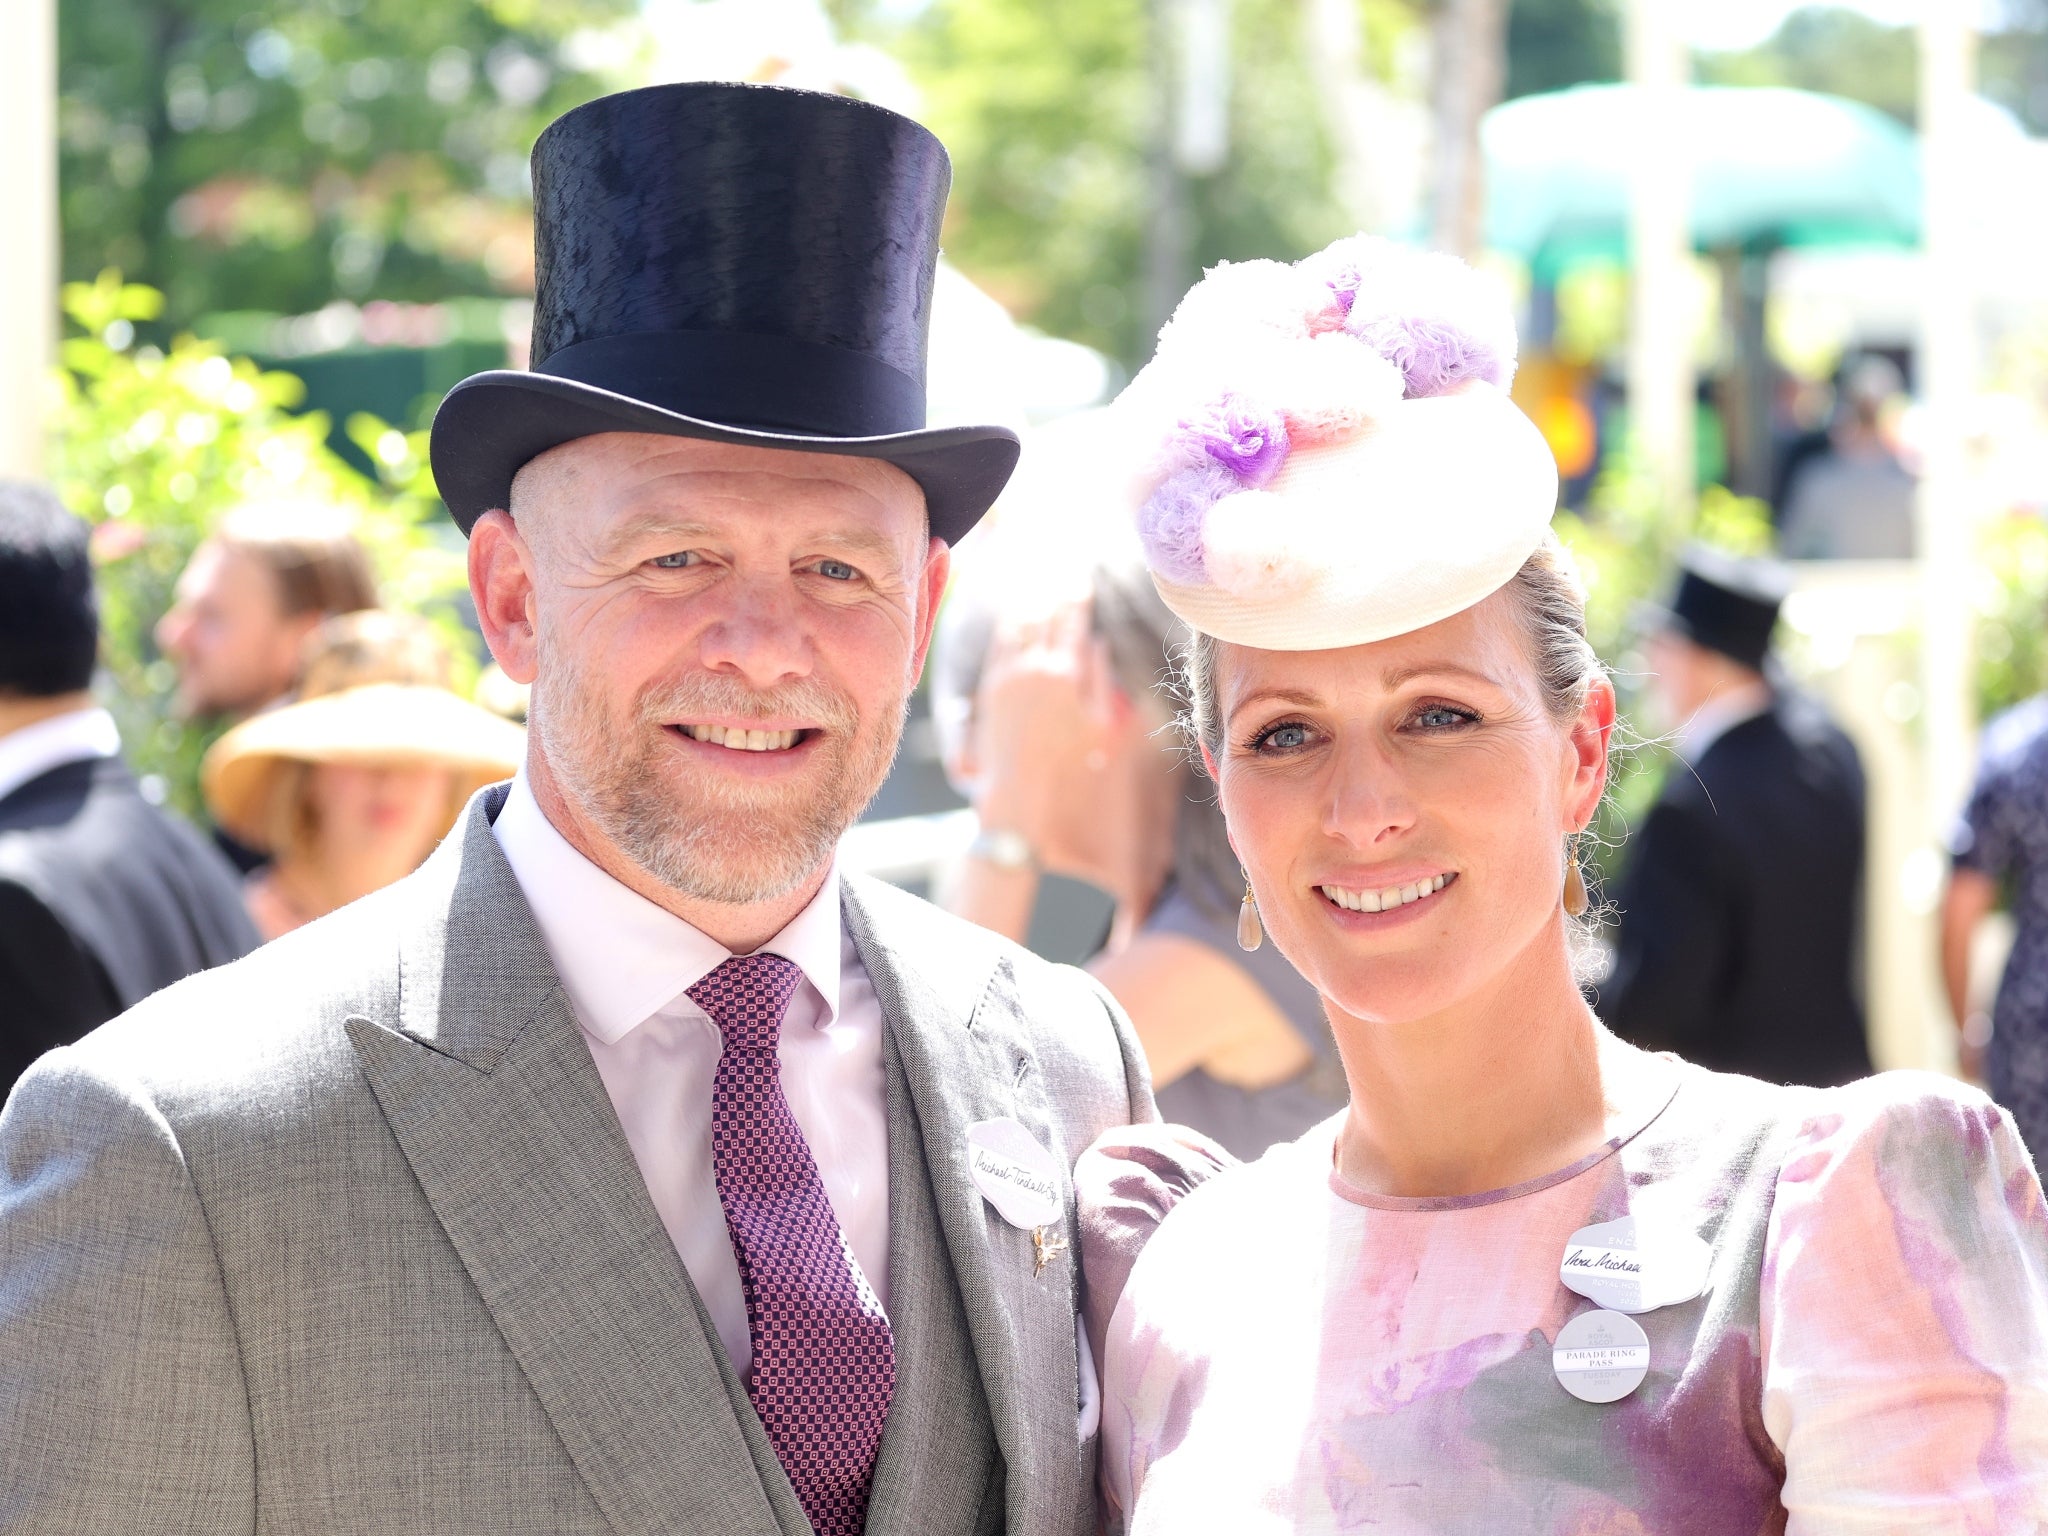 Mike and Zara Tindall attend Ascot 2022